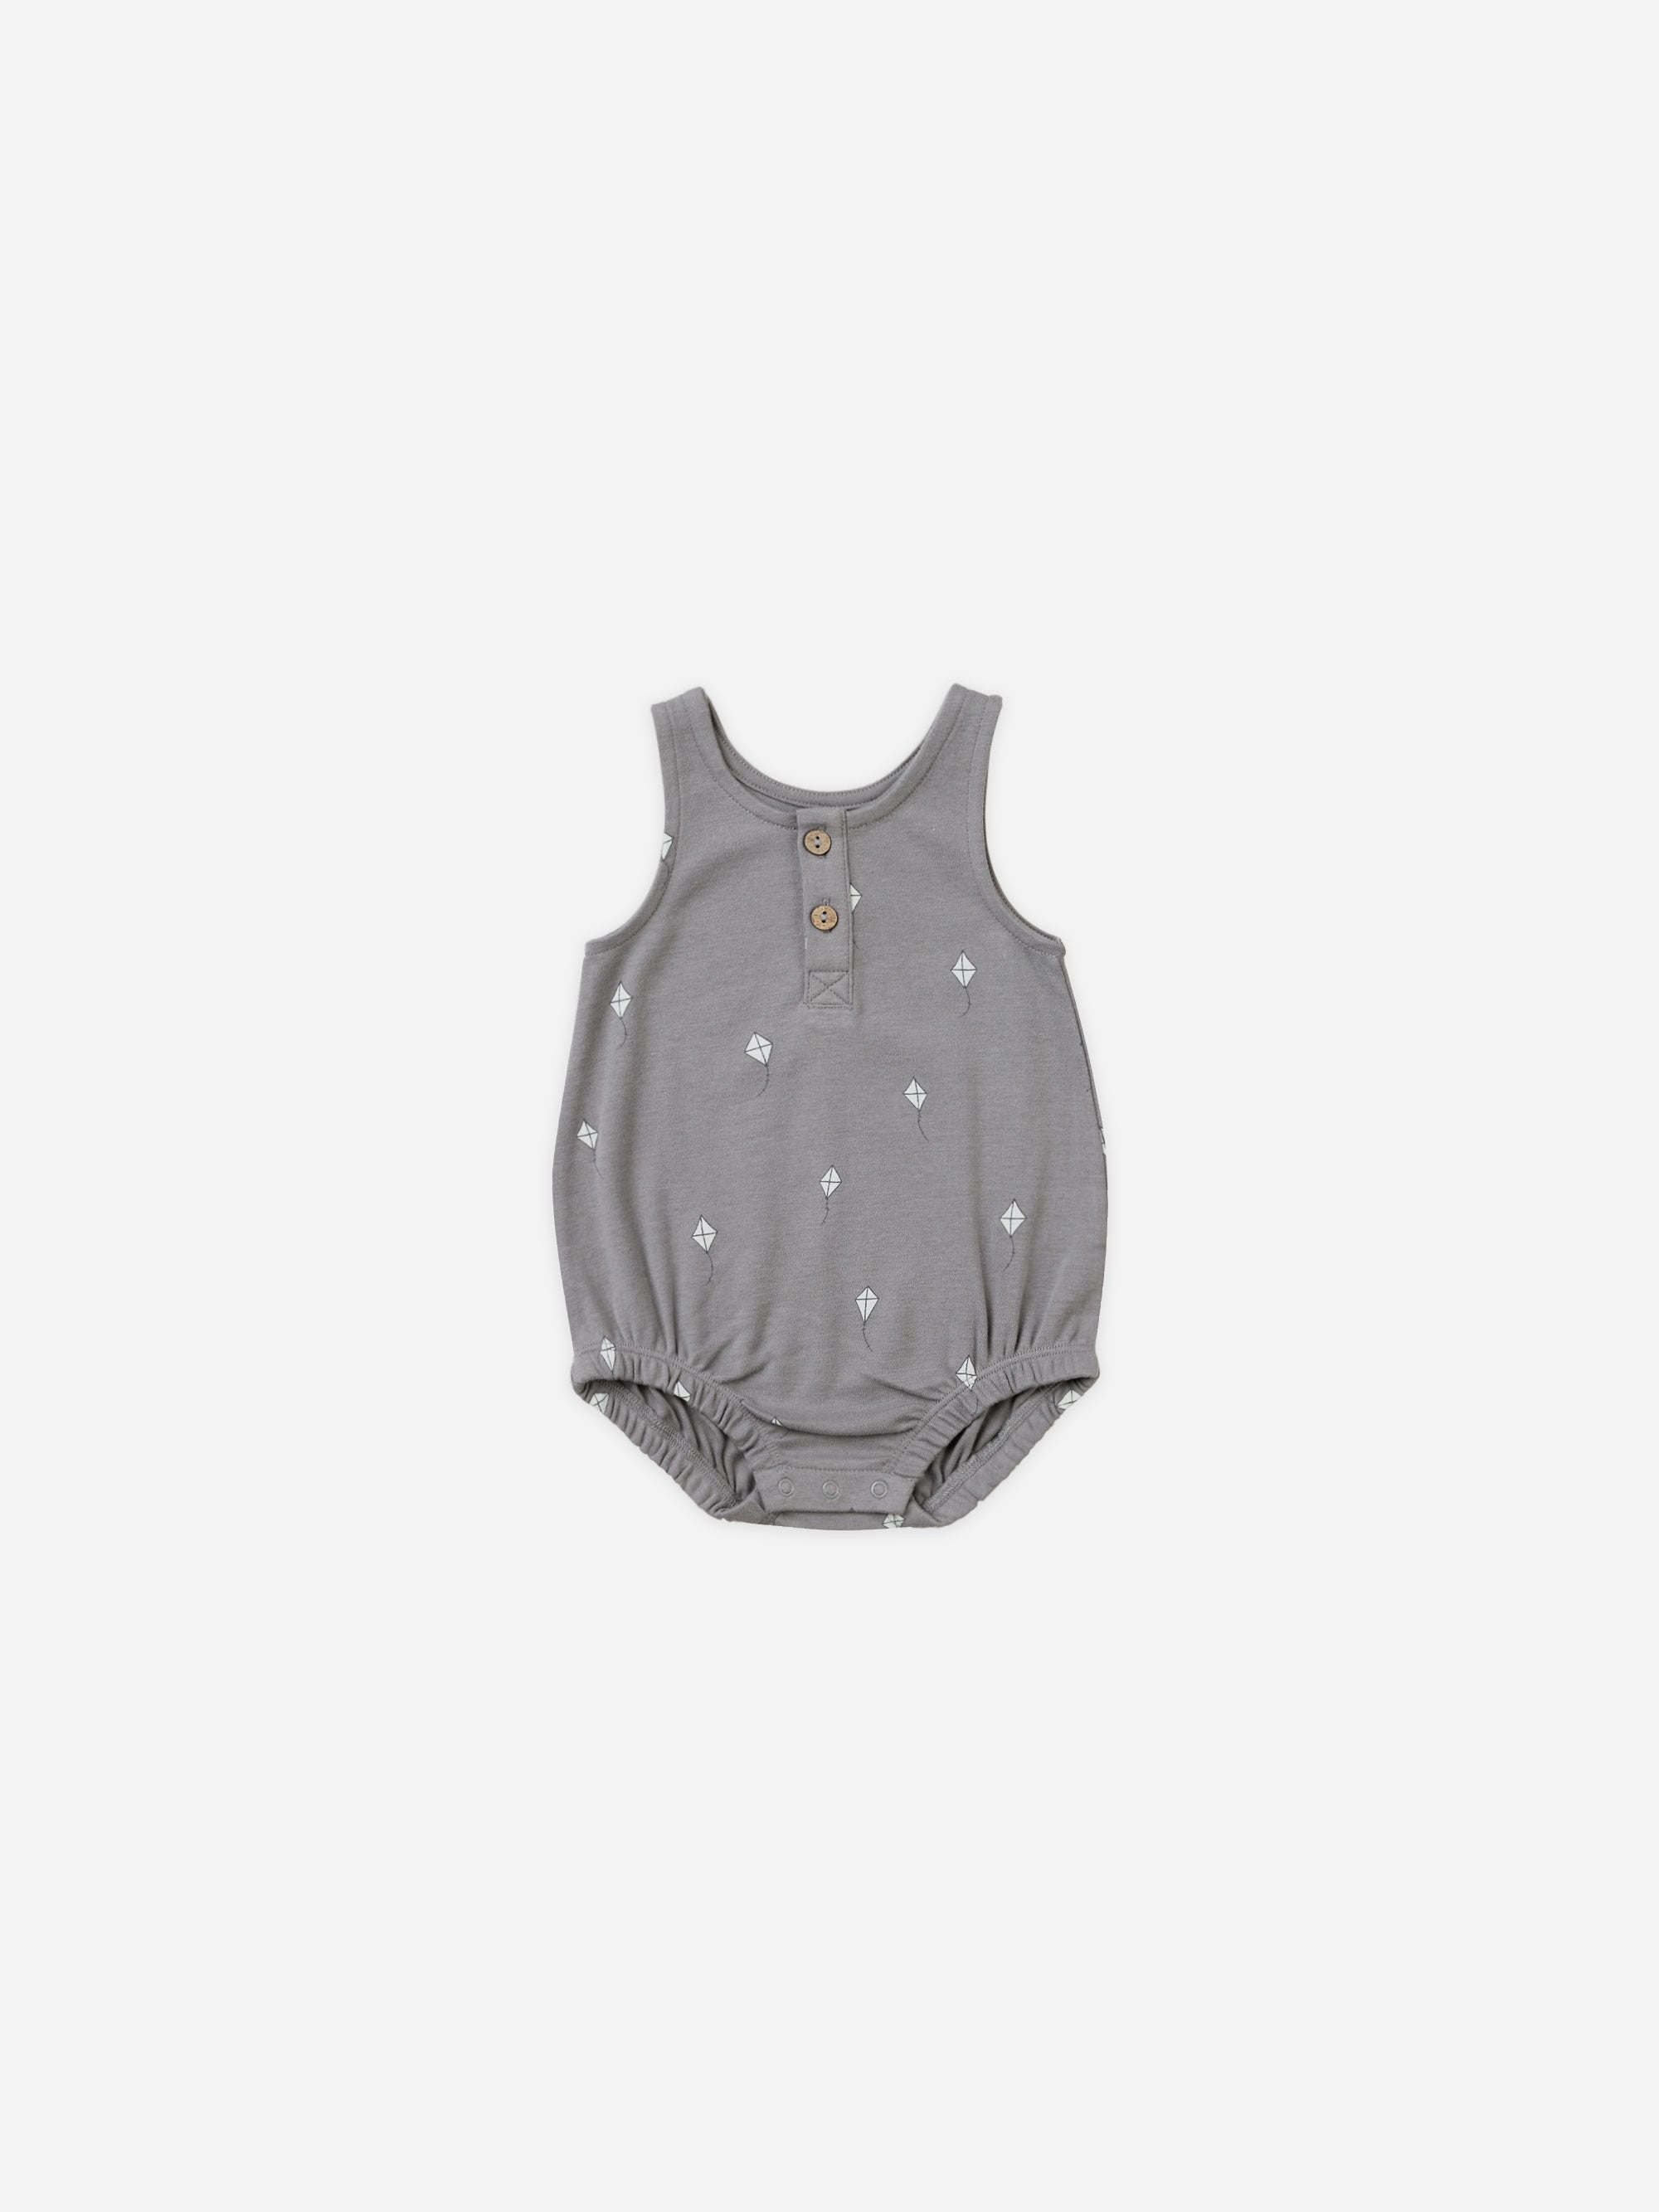 Sleeveless Bubble Romper || Kites - Rylee + Cru | Kids Clothes | Trendy Baby Clothes | Modern Infant Outfits |